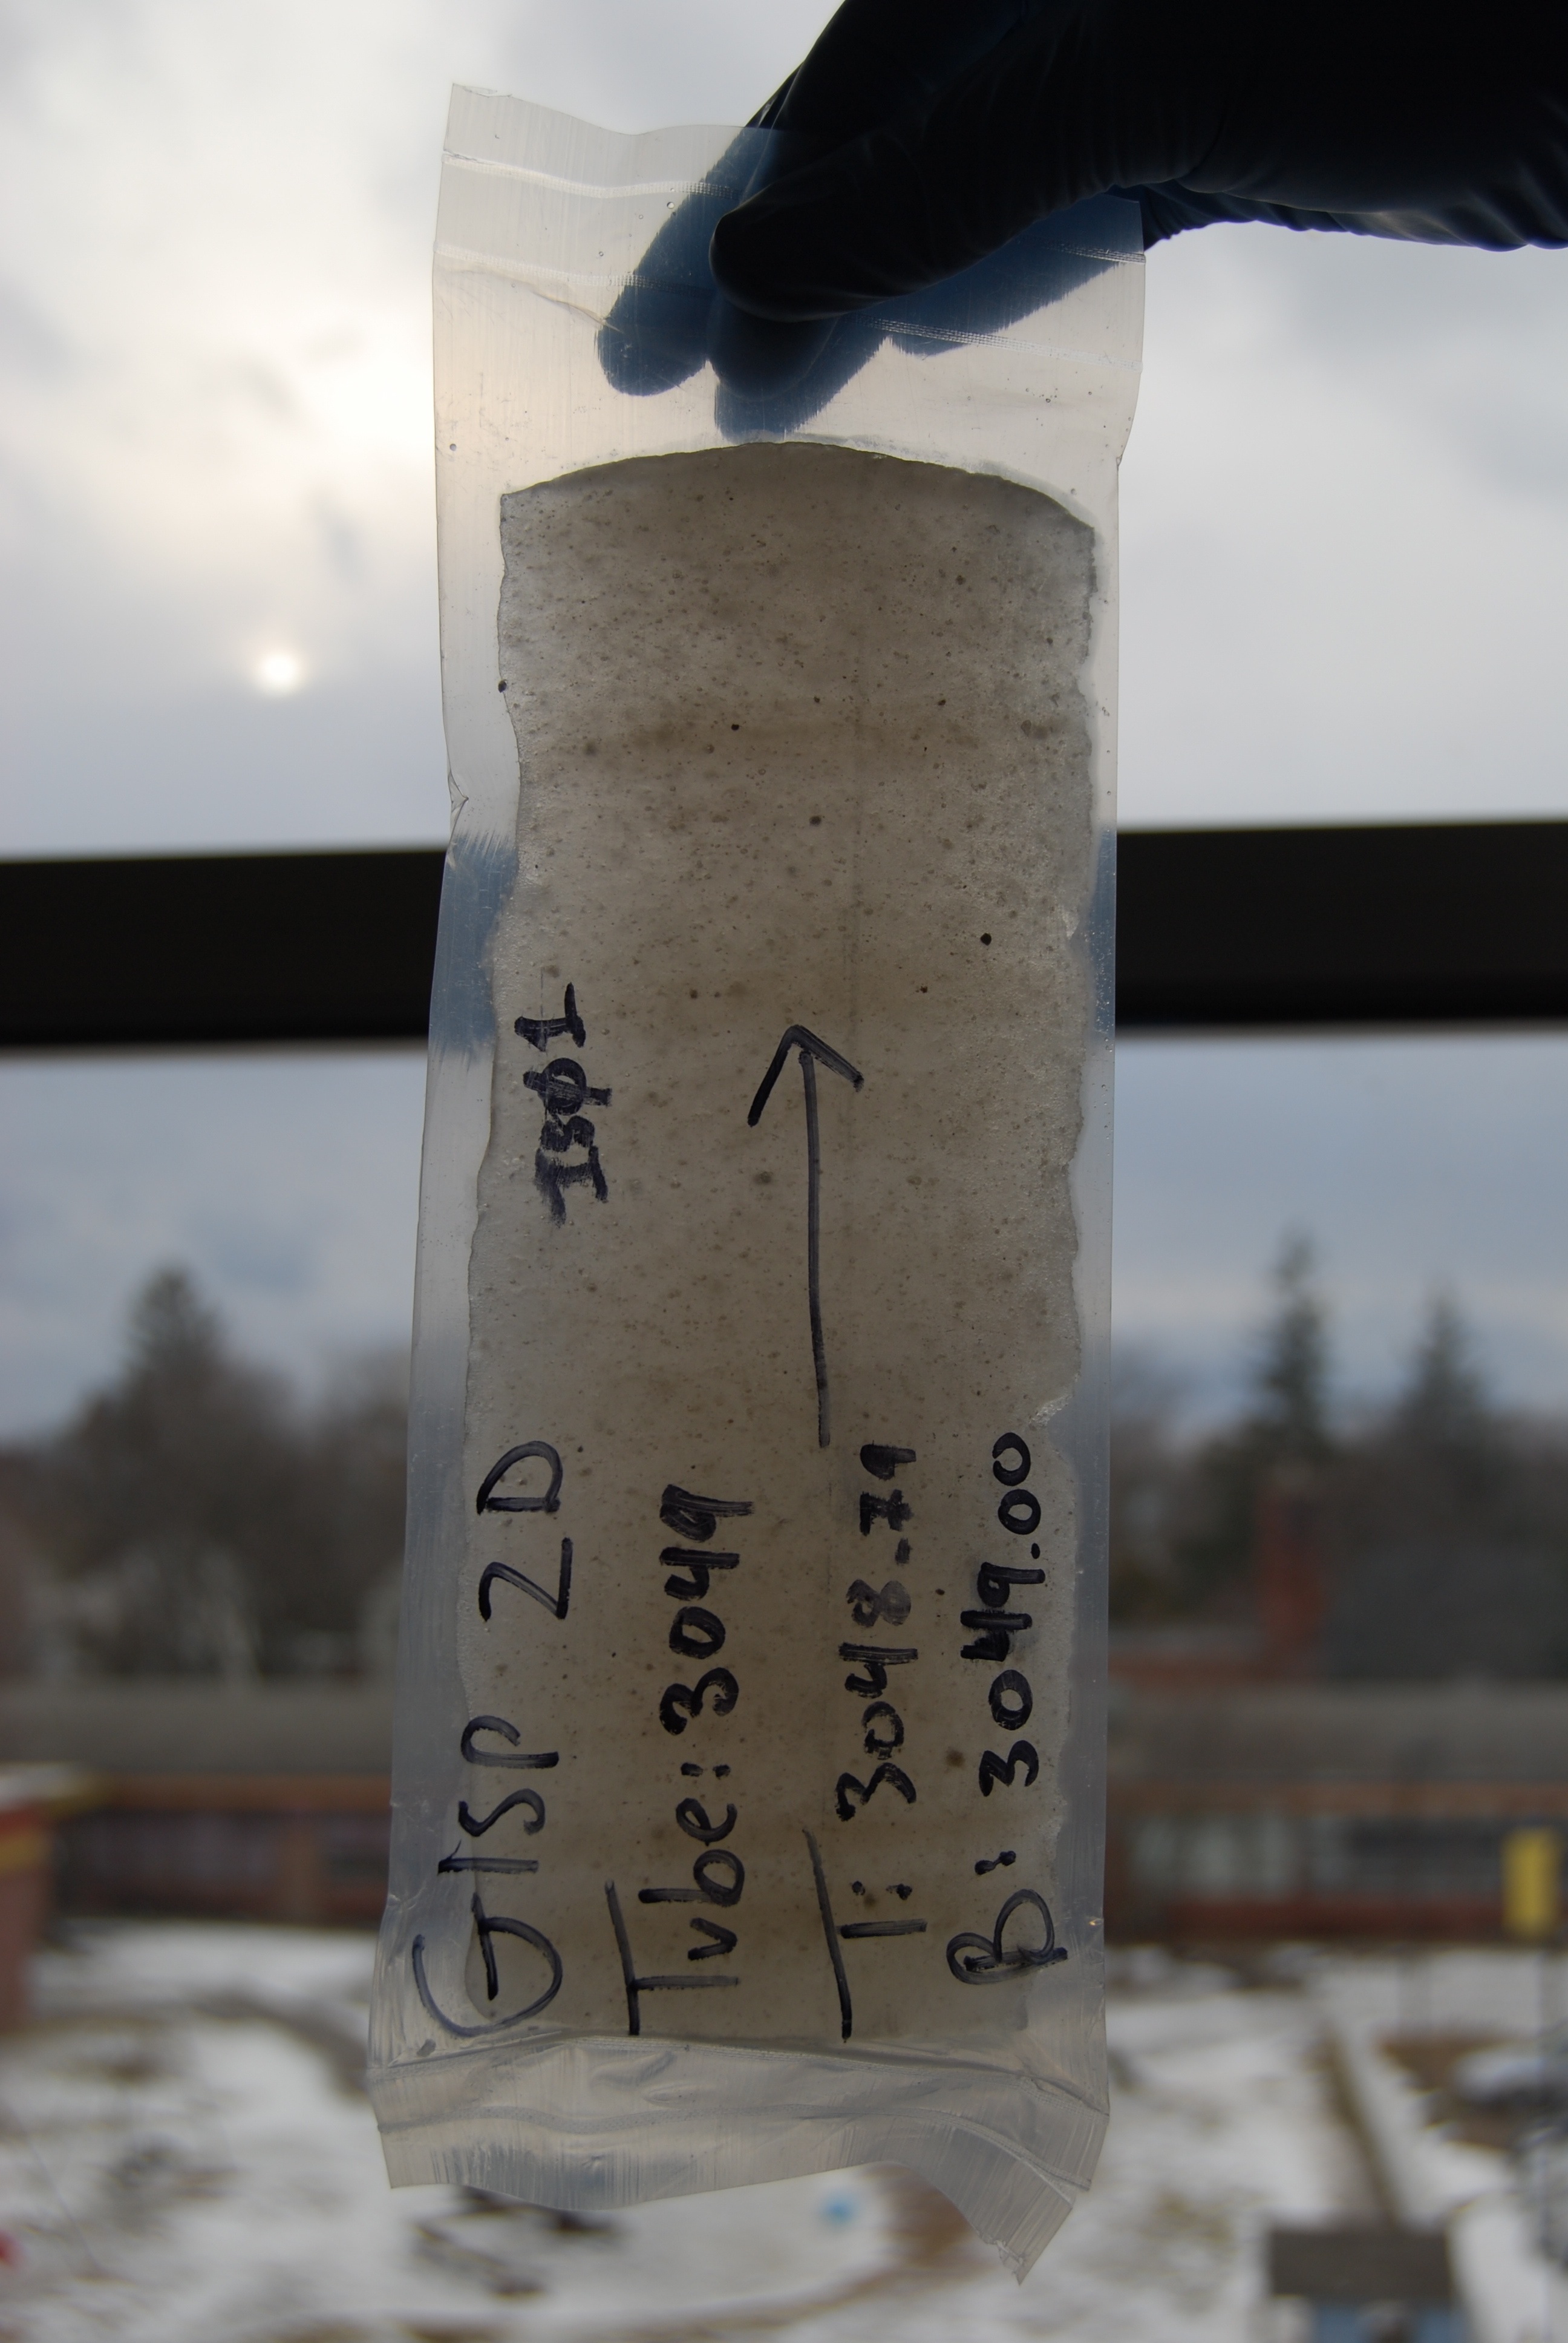 Piece of the GISP2 ice core that the researchers analyzed for the isotope beryllium-10, showing silt and sand embedded in ice. Soon after this picture was taken, the ice was crushed in the University of Vermont clean lab and the sediment was isolated for analysis. Credit: Paul Bierman, University of Vermont